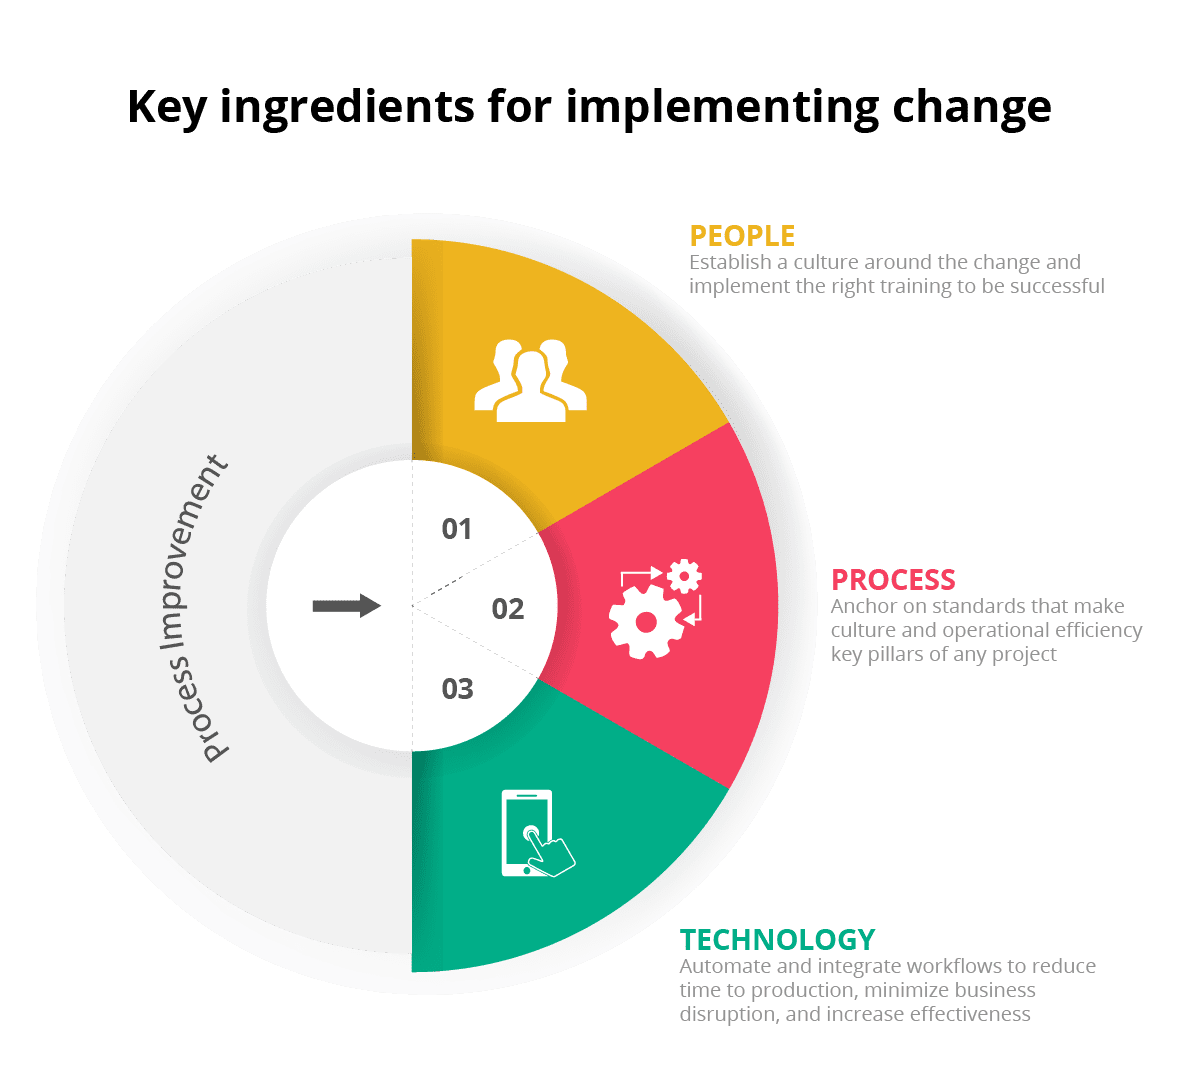 Key ingredients for implementing change